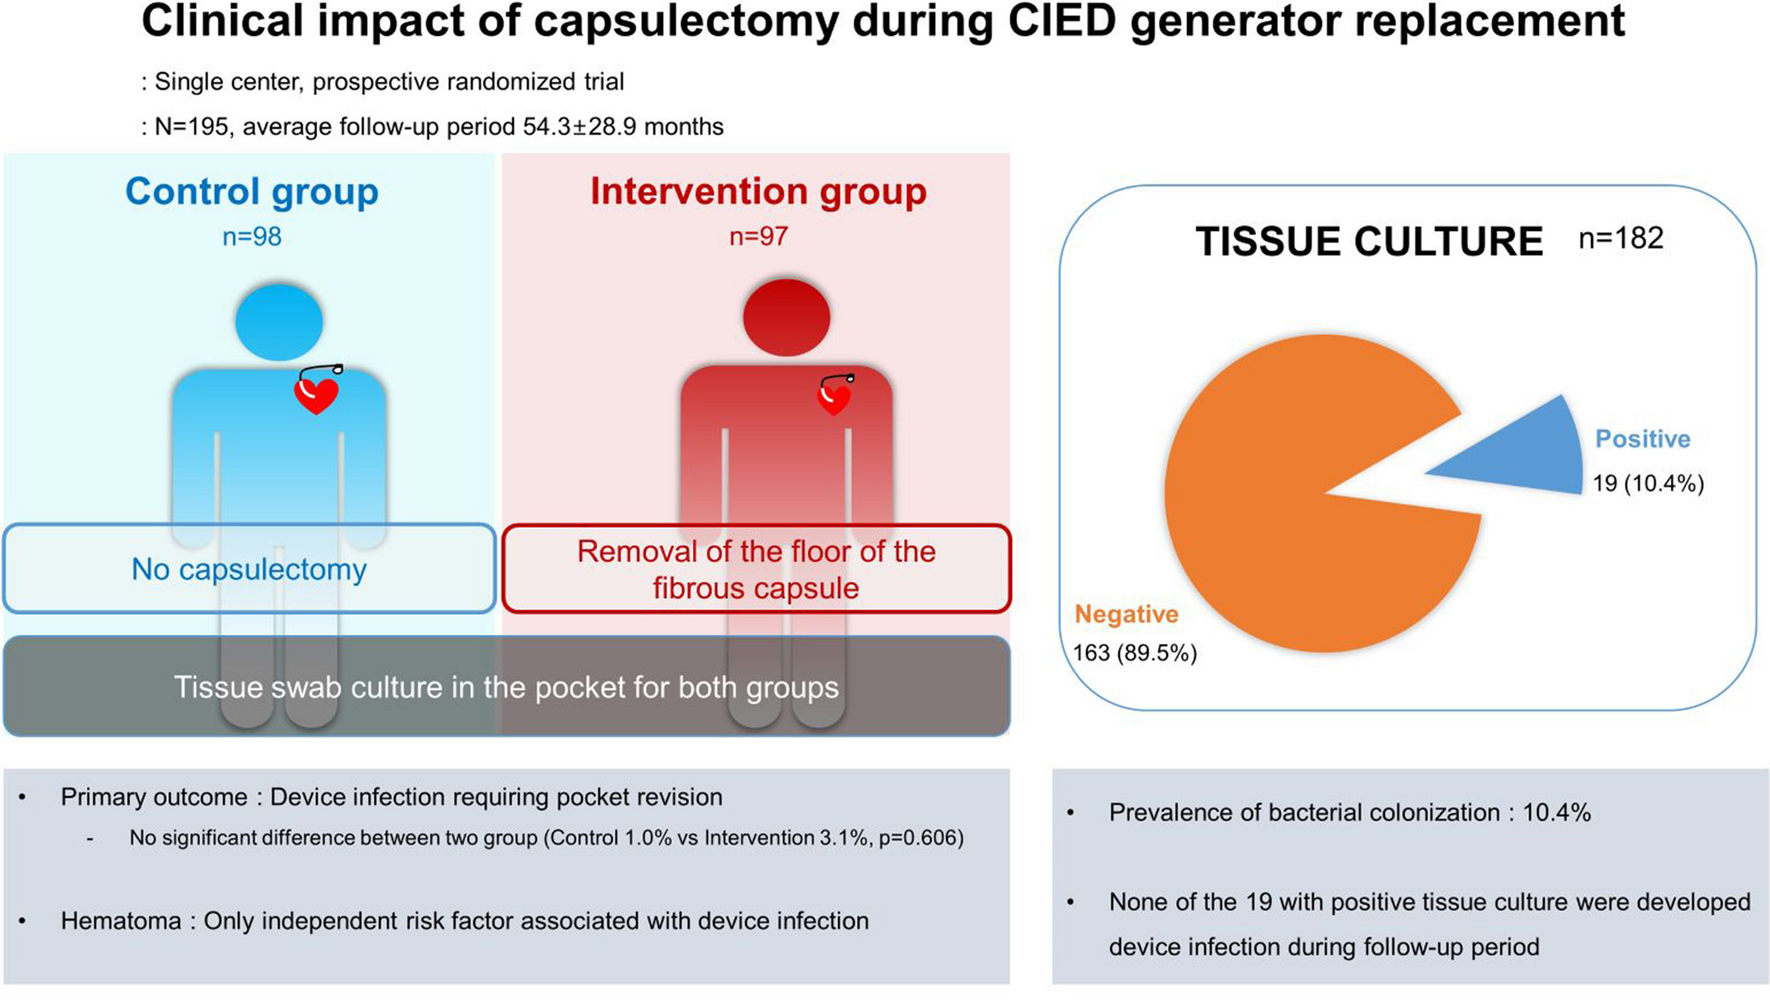 Clinical impact of capsulectomy during cardiac implantable electronic device generator replacement: a prospective randomized trial